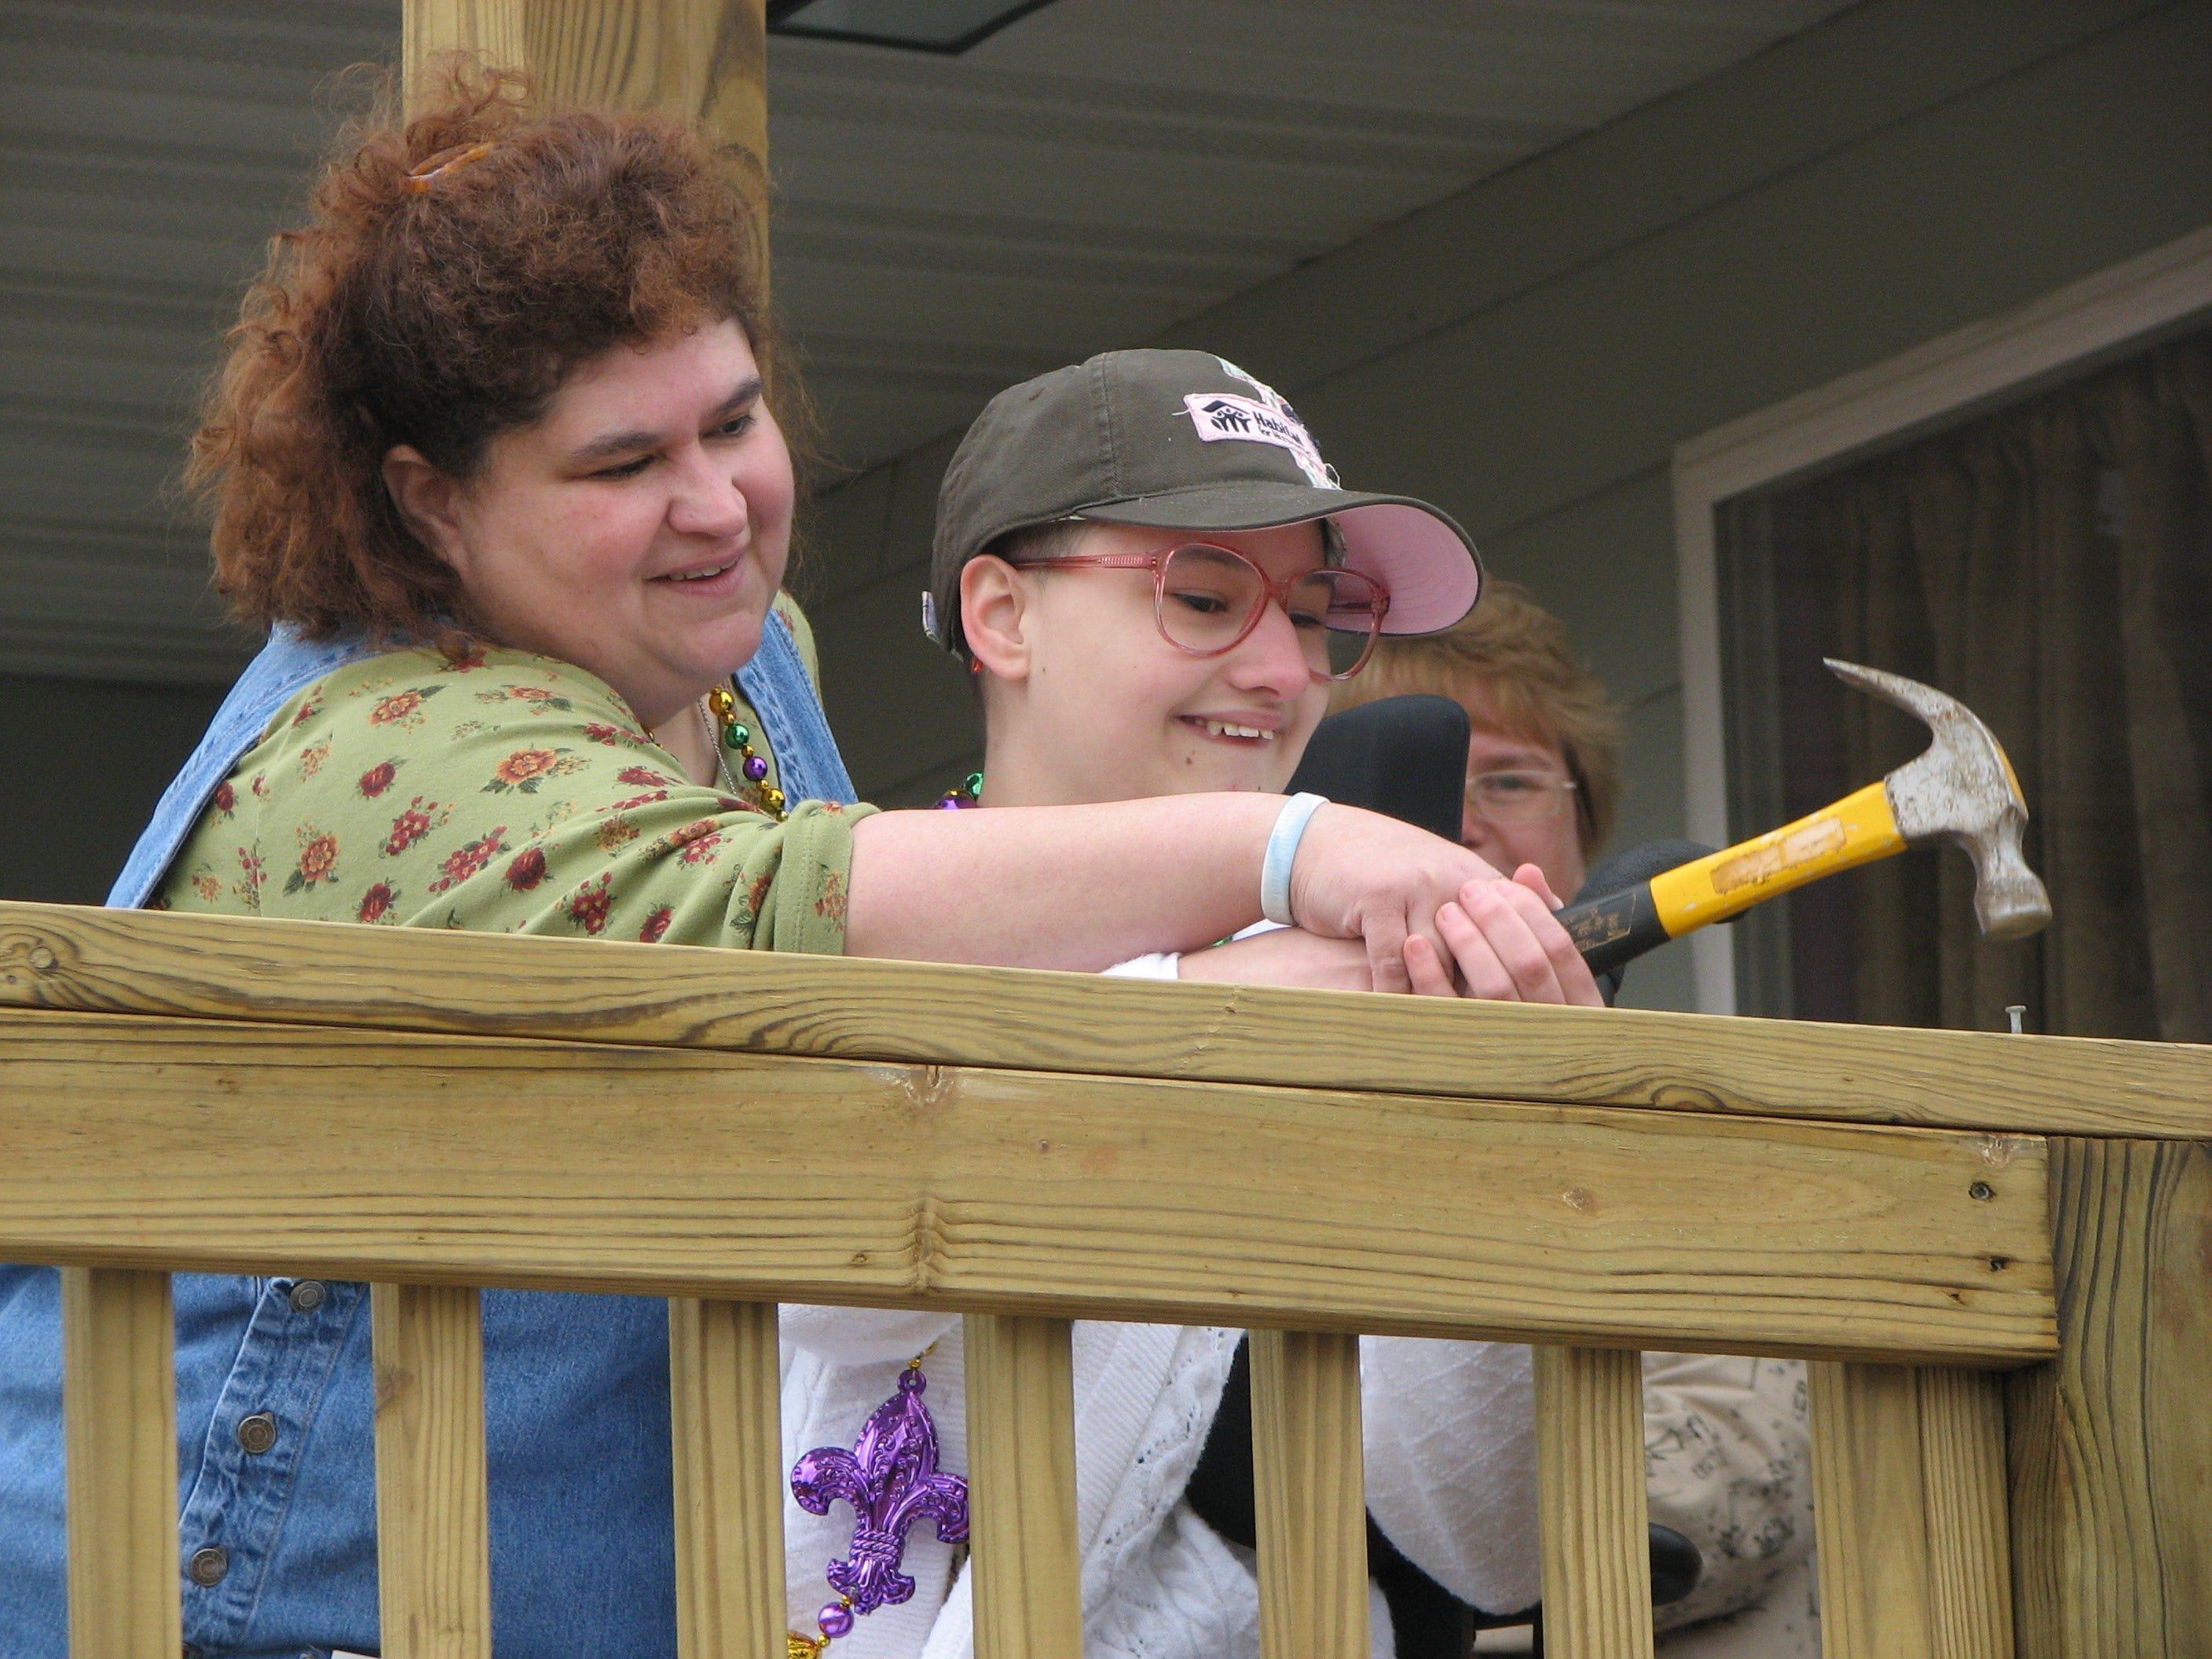 Gypsy Rose Blanchard raises her hammer during the dedication of her family